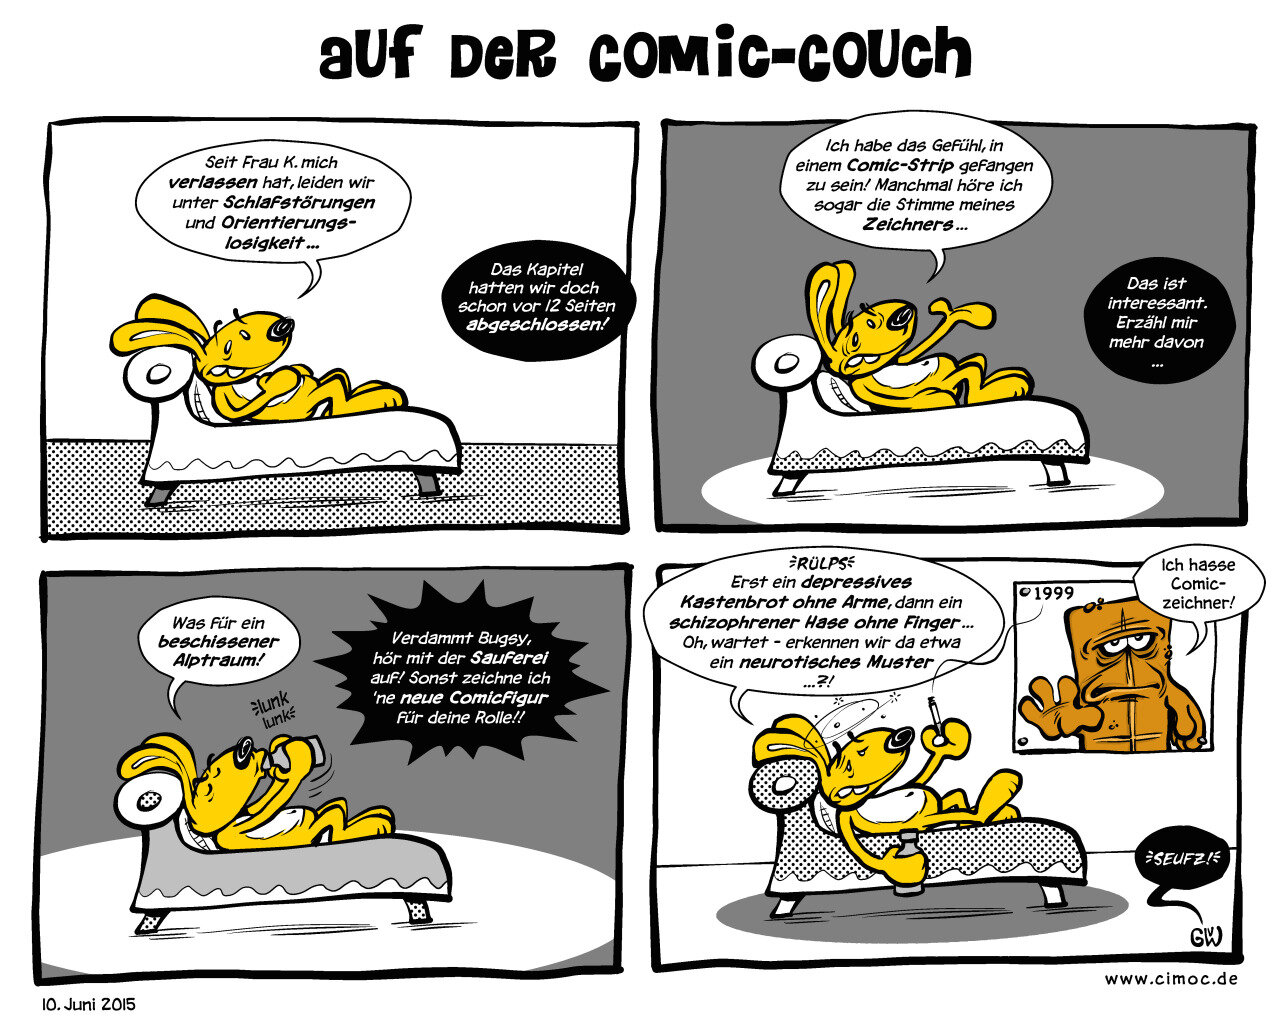 Bernd das Brot Bugsy Comic Couch - Skizze Character Design by Georg vW 1999 02.jpg